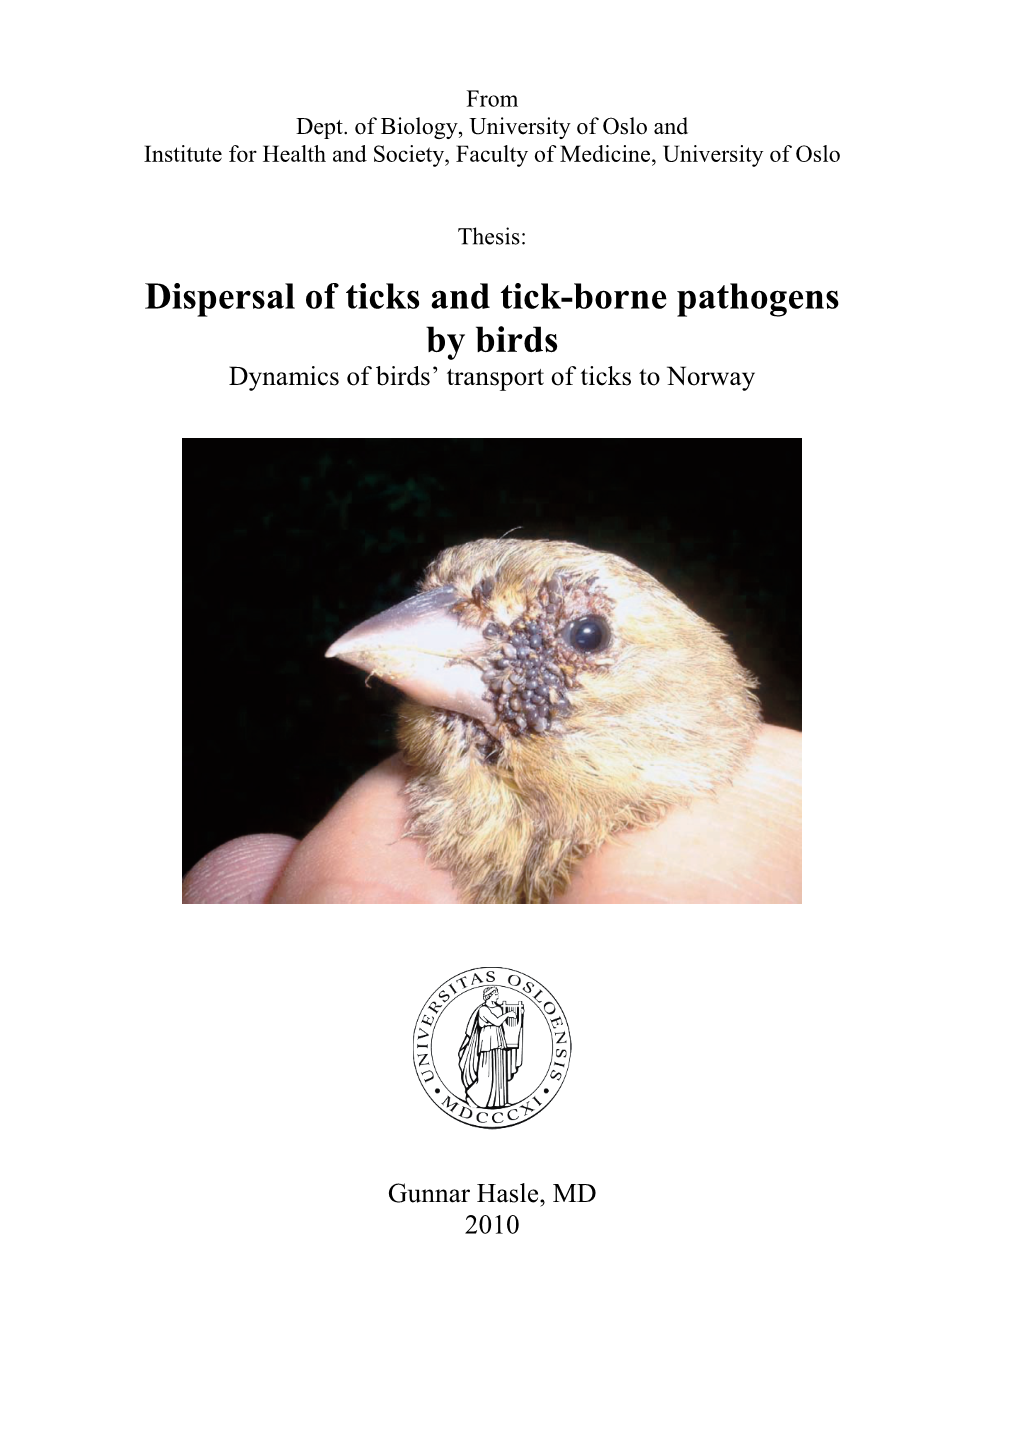 Dispersal of Ticks and Tick Borne Diseases by Birds